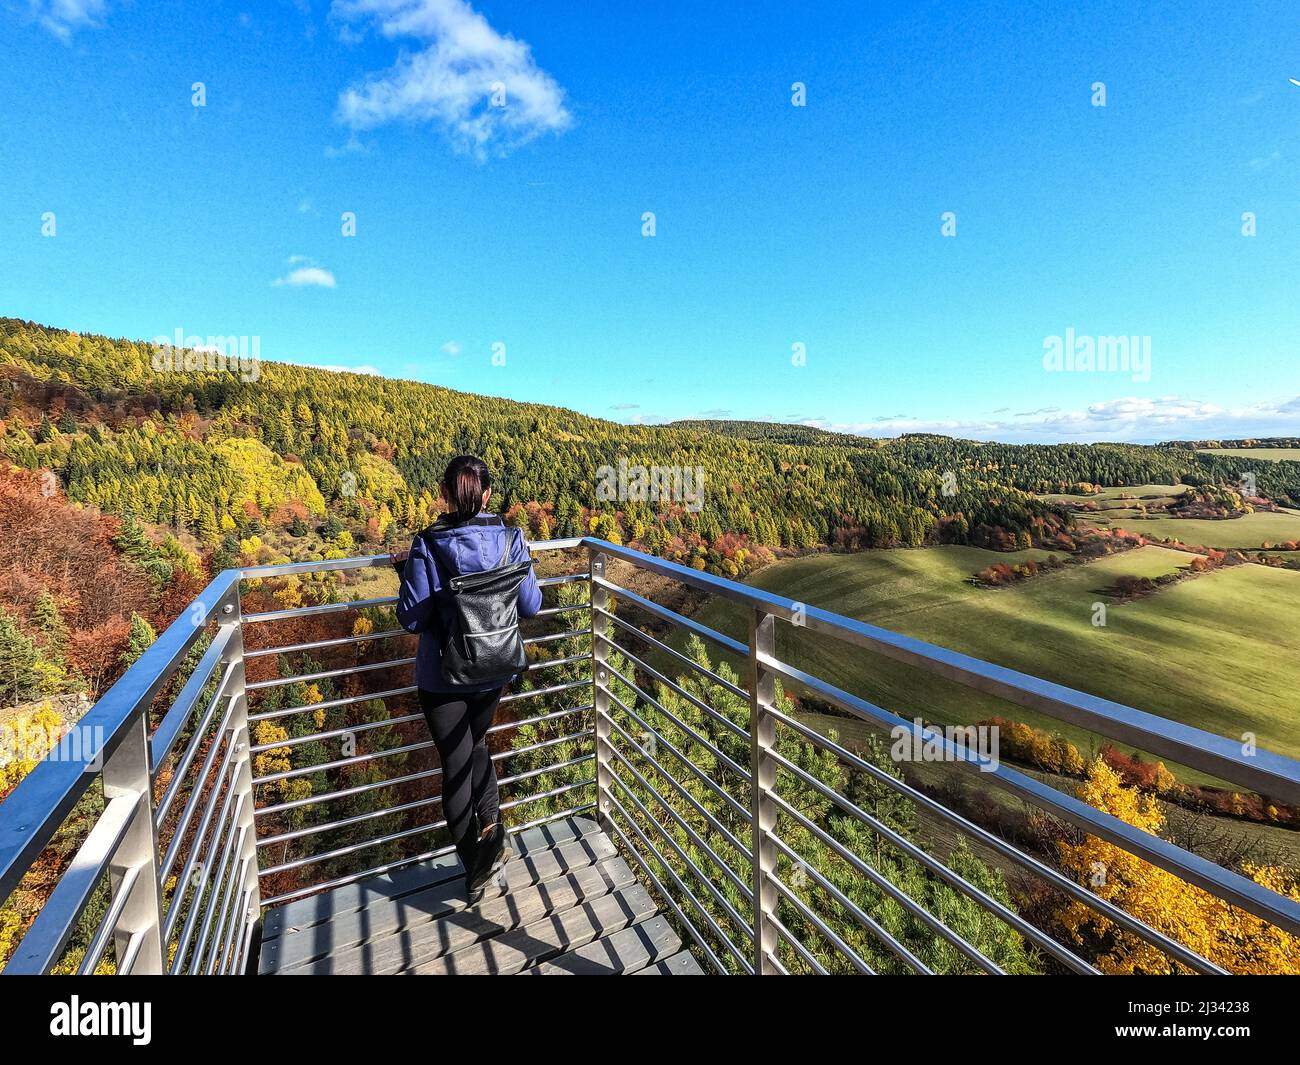 A view of the Lacnovsky canyon in the locality of the village of Lipovce in Slovakia Stock Photo